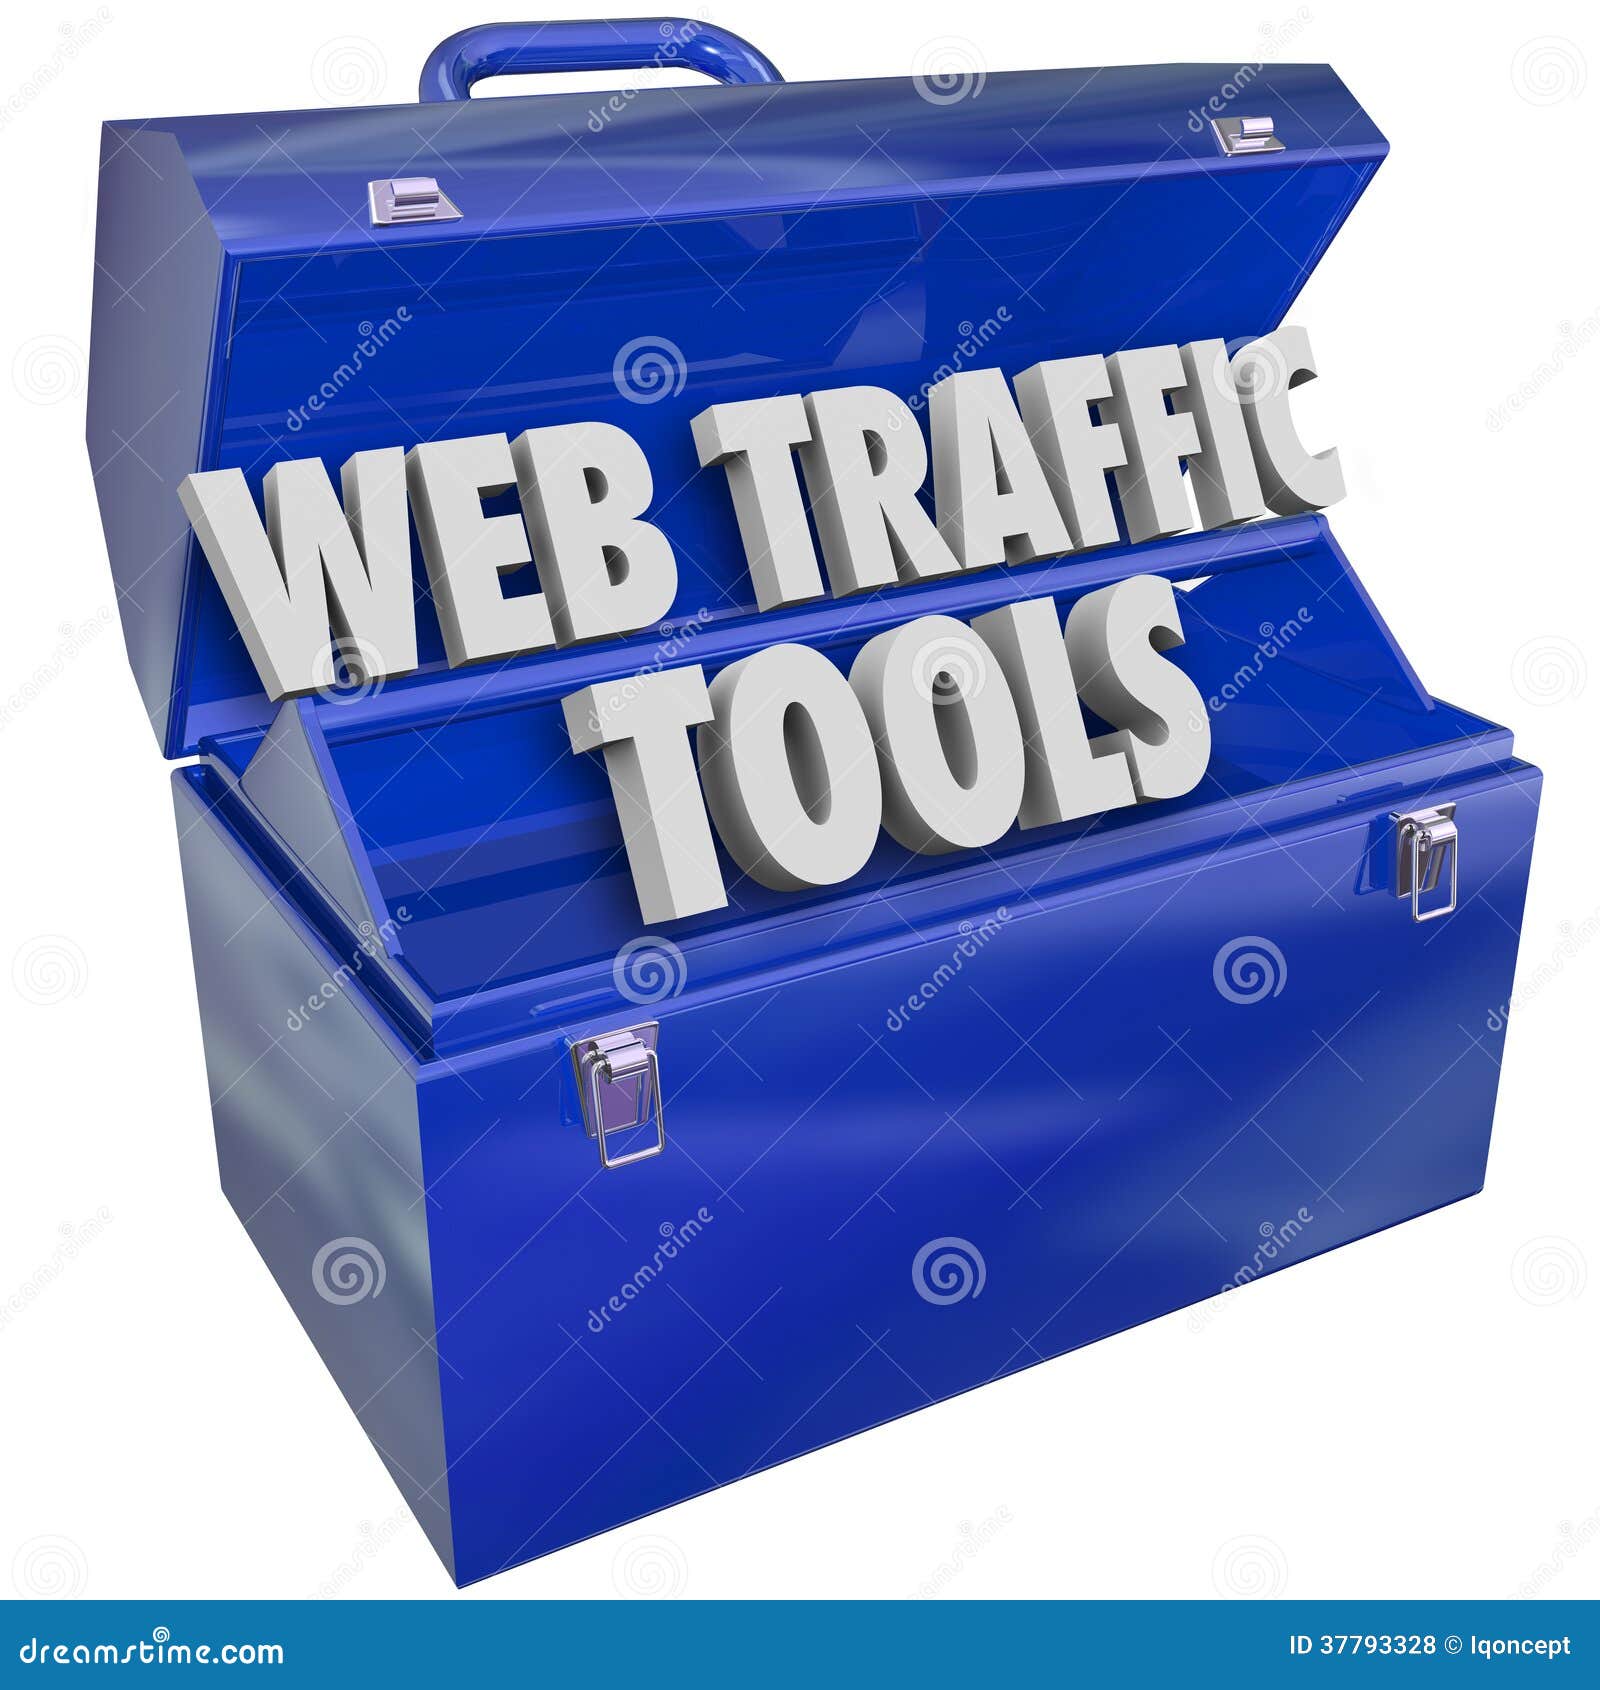 ... : Web Traffic Tools Toolbox Increase Website Search Frequency Repu